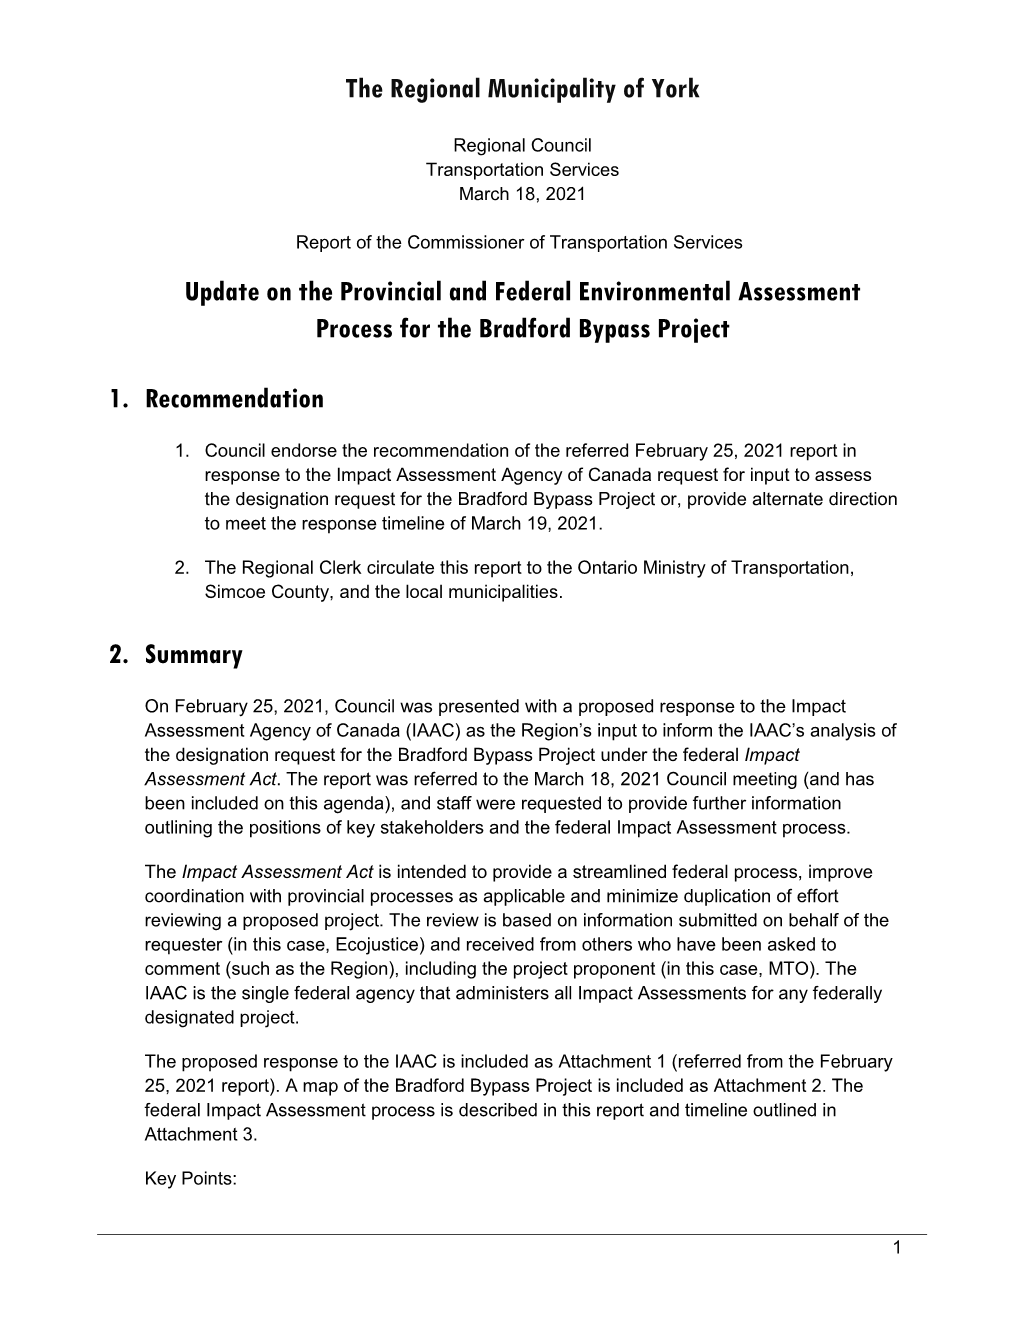 Update on the Provincial and Federal Environmental Assessment Process for the Bradford Bypass Project 1. Recommendation